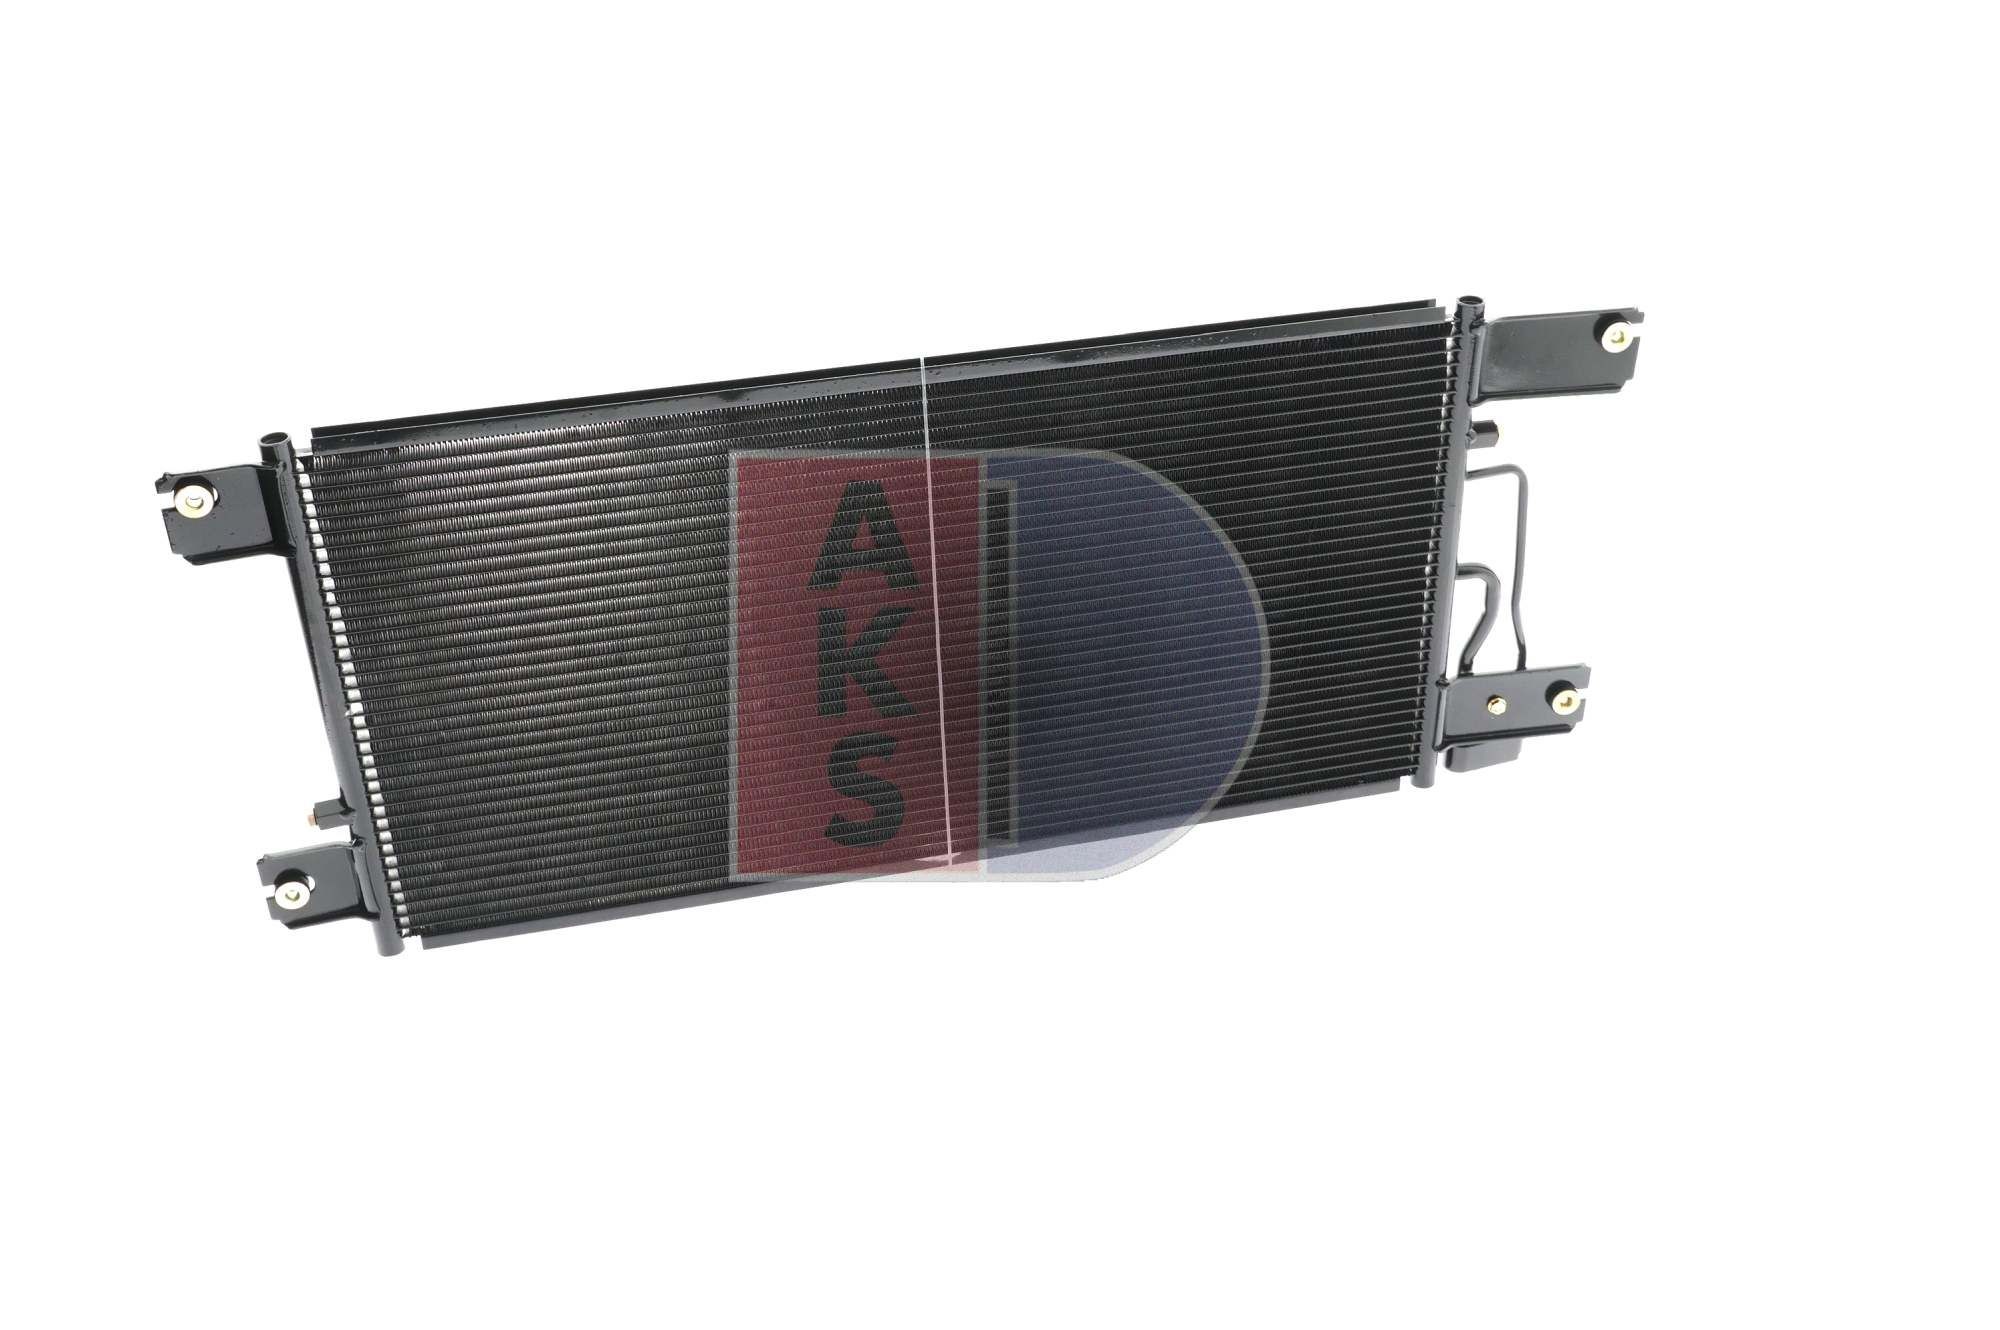 Air conditioning condenser 272001N from AKS DASIS